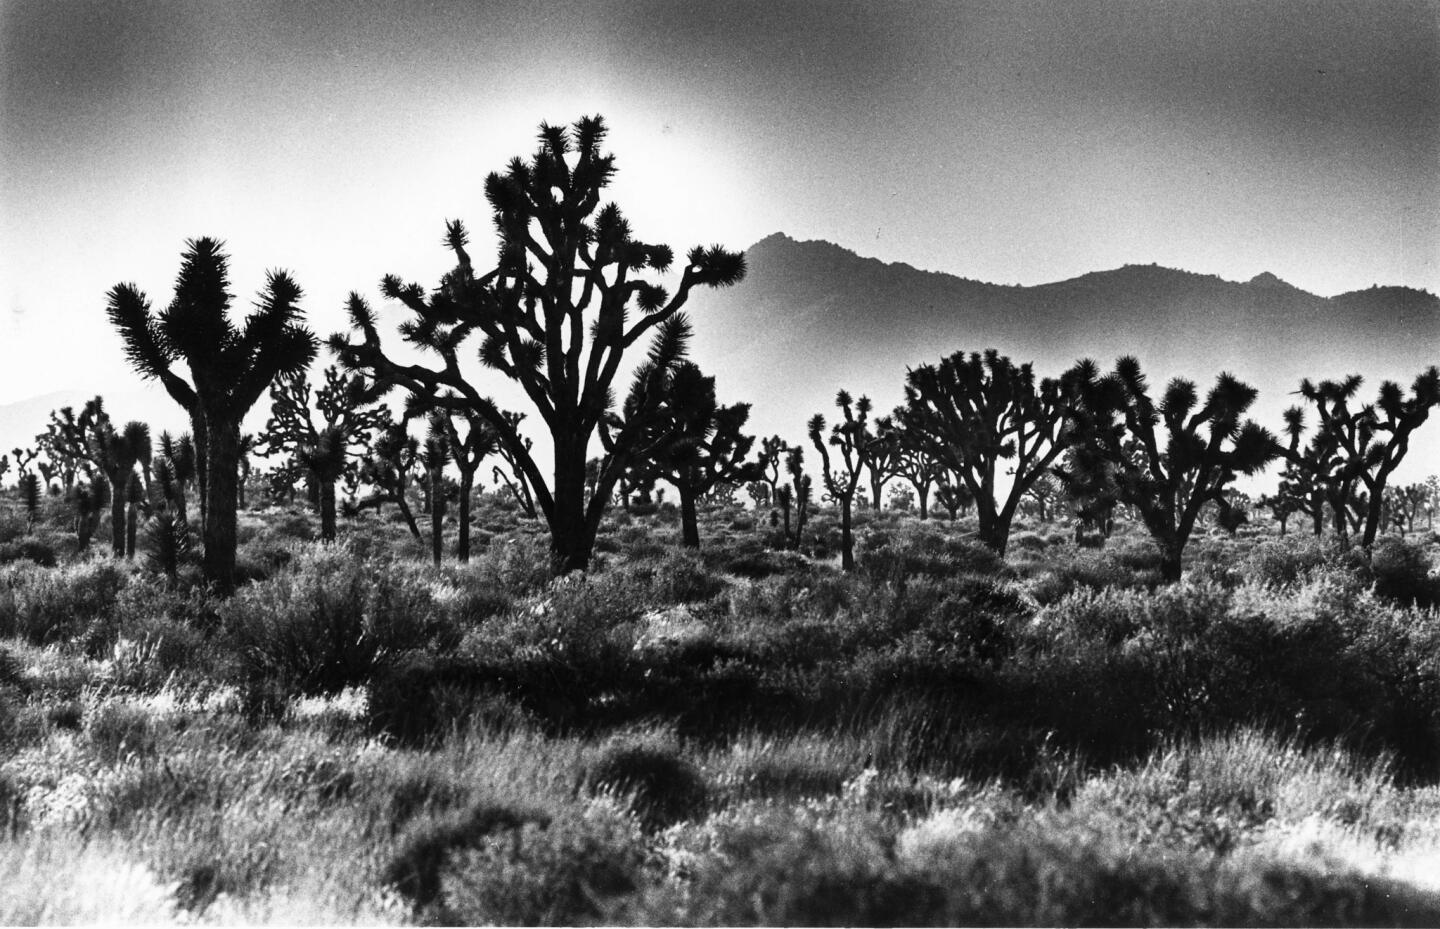 Grass nurtured by winter rains covers a section of the Hidden Valley area of Joshua Tree National Park. Photo dated May 23, 1986.